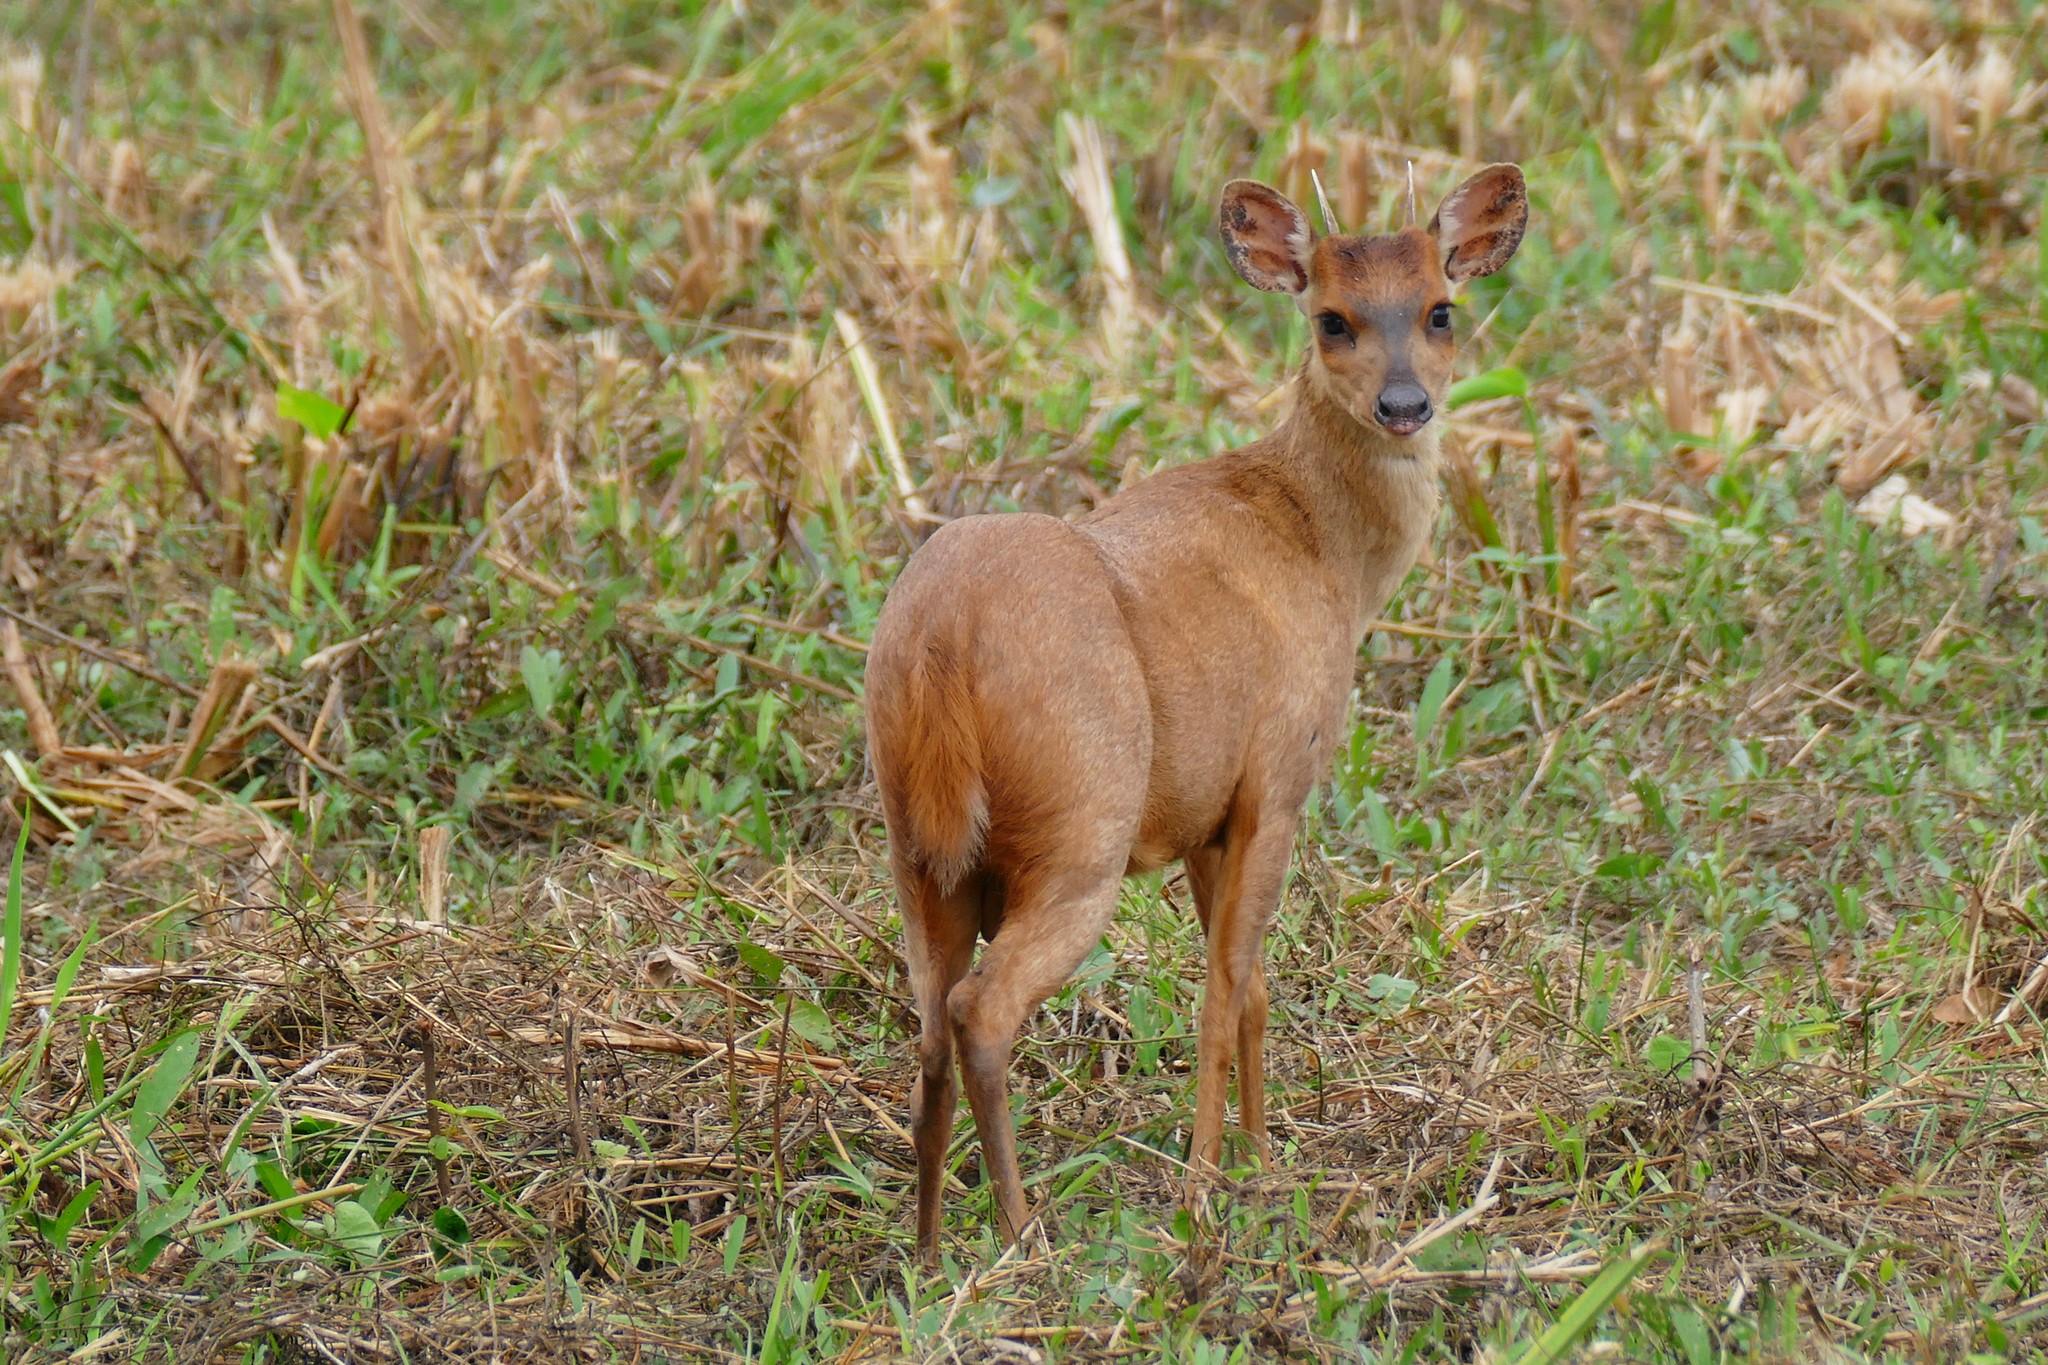 Mazama americana, Red Brocket, has duplicated chromosomes ranging between 42 and 52. Therefore it cannot interbreed with other Mazama species. It was not discovered as a separate species until genetic testing, and could potentially be physically identical to other brockets. They are at least very difficult to visibly differentiate.